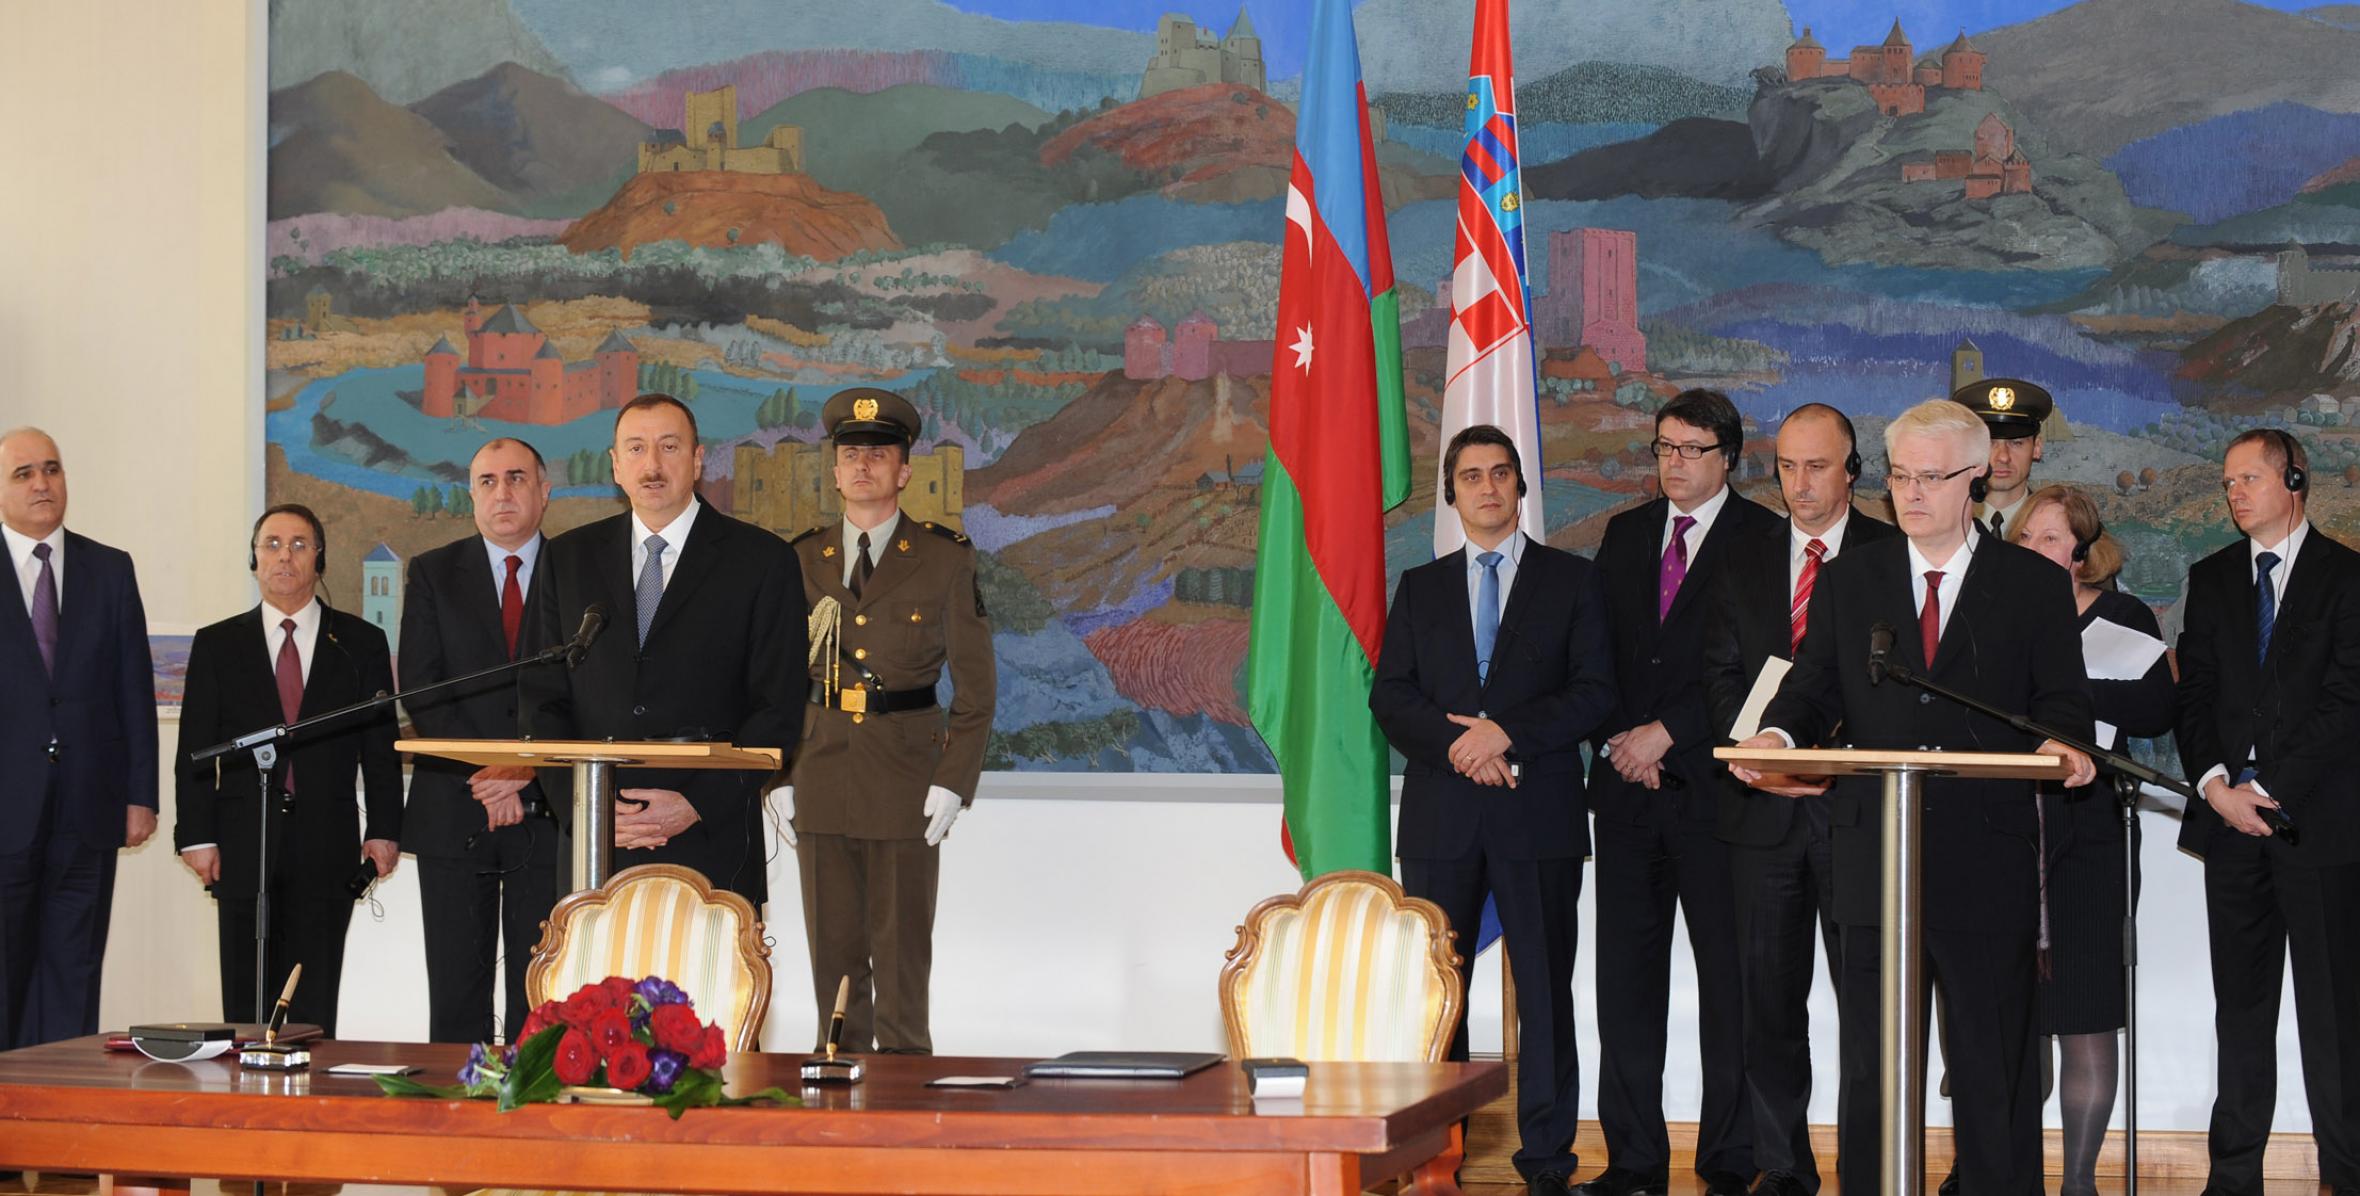 Presidents of Azerbaijan and Croatia made statements for the press